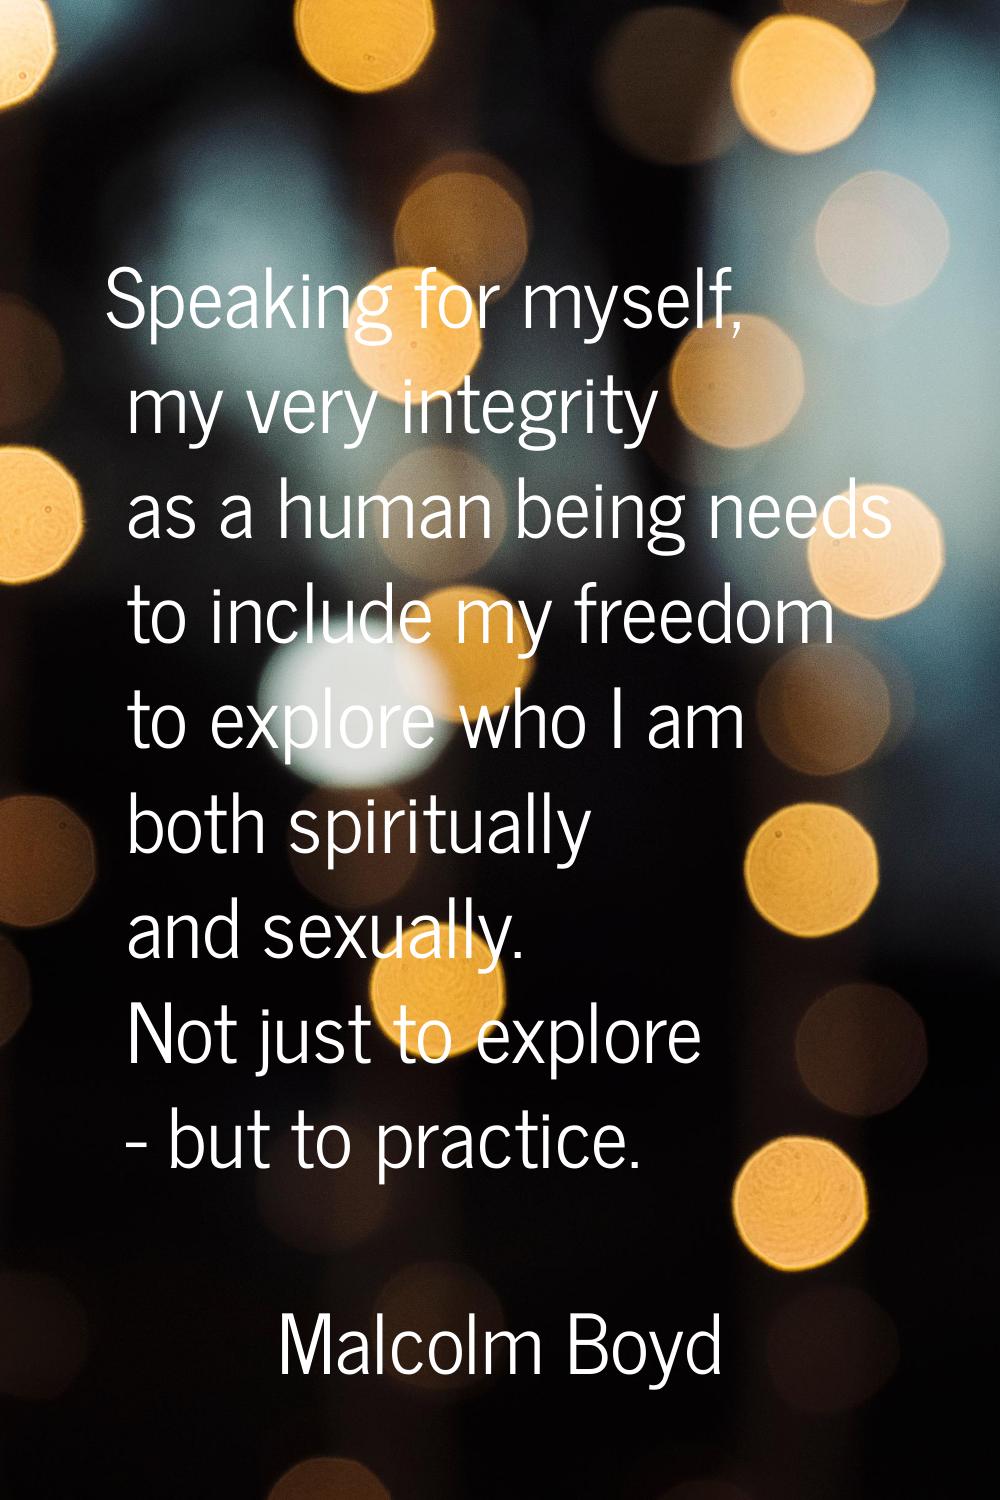 Speaking for myself, my very integrity as a human being needs to include my freedom to explore who 